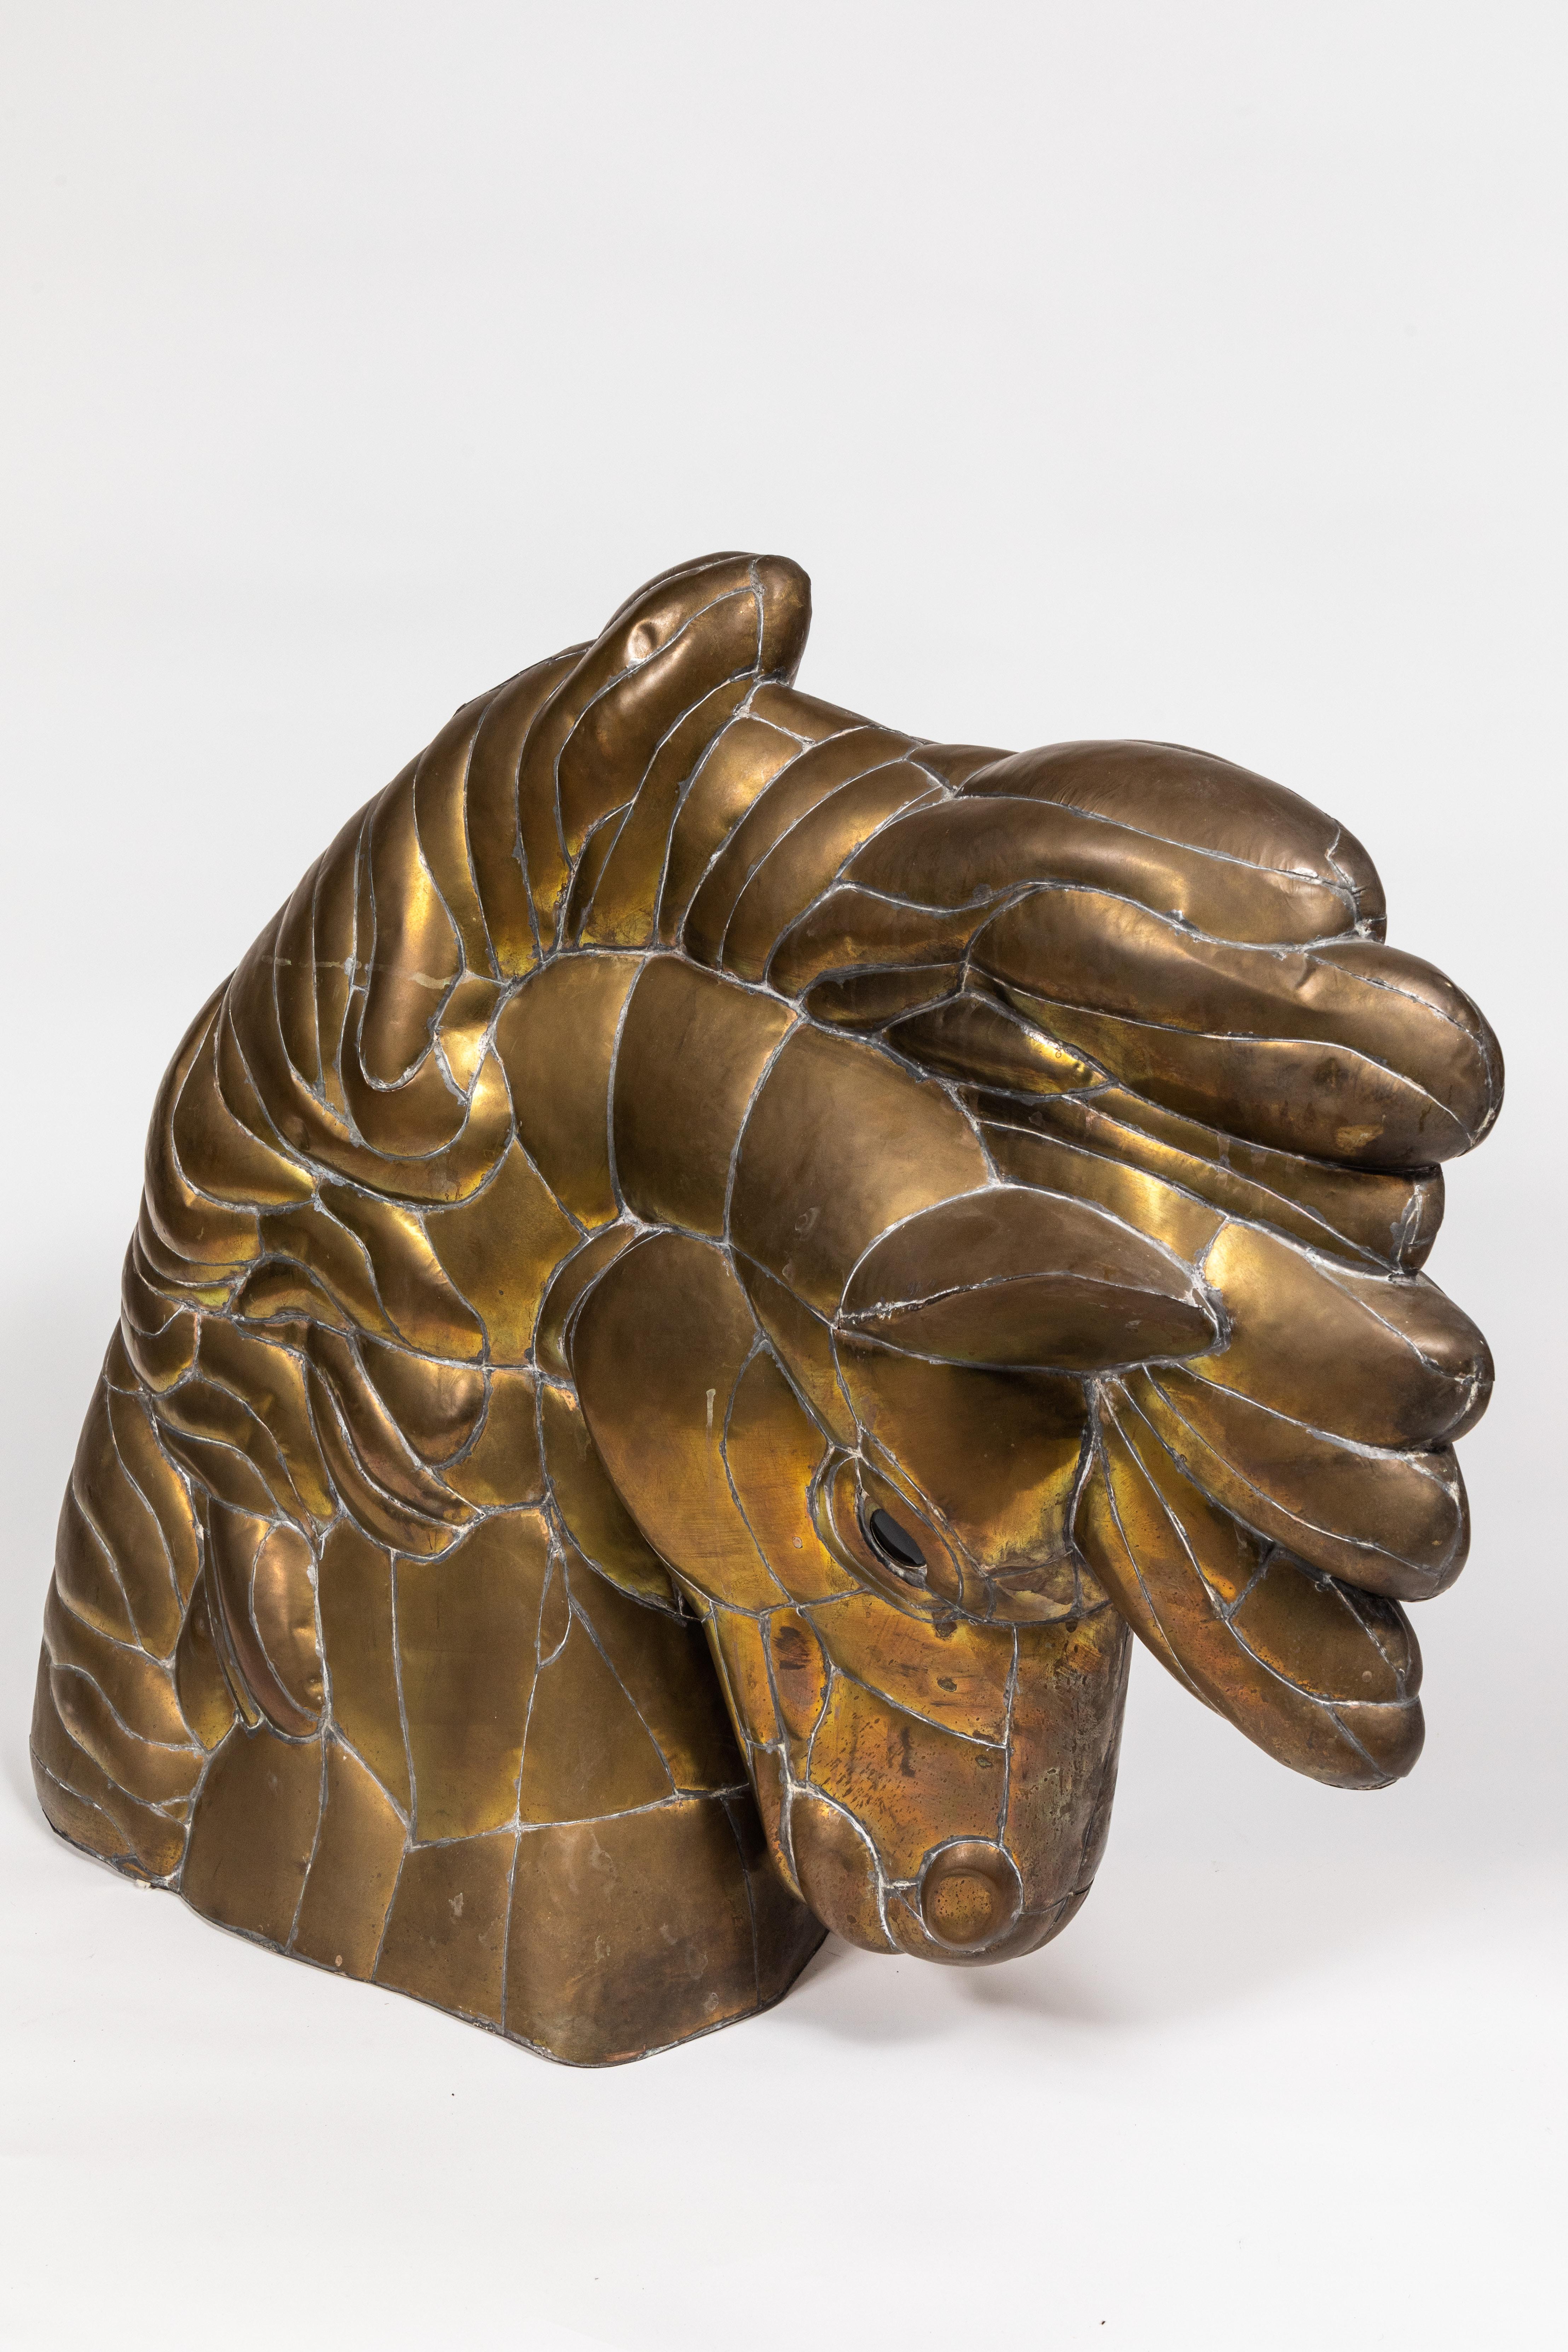 This expressive horse head sculpture in pieced and welded brass features flared nostrils, a flowing mane, and glass eyes. It rests on its finished and closed base. Hollow. No signature found.